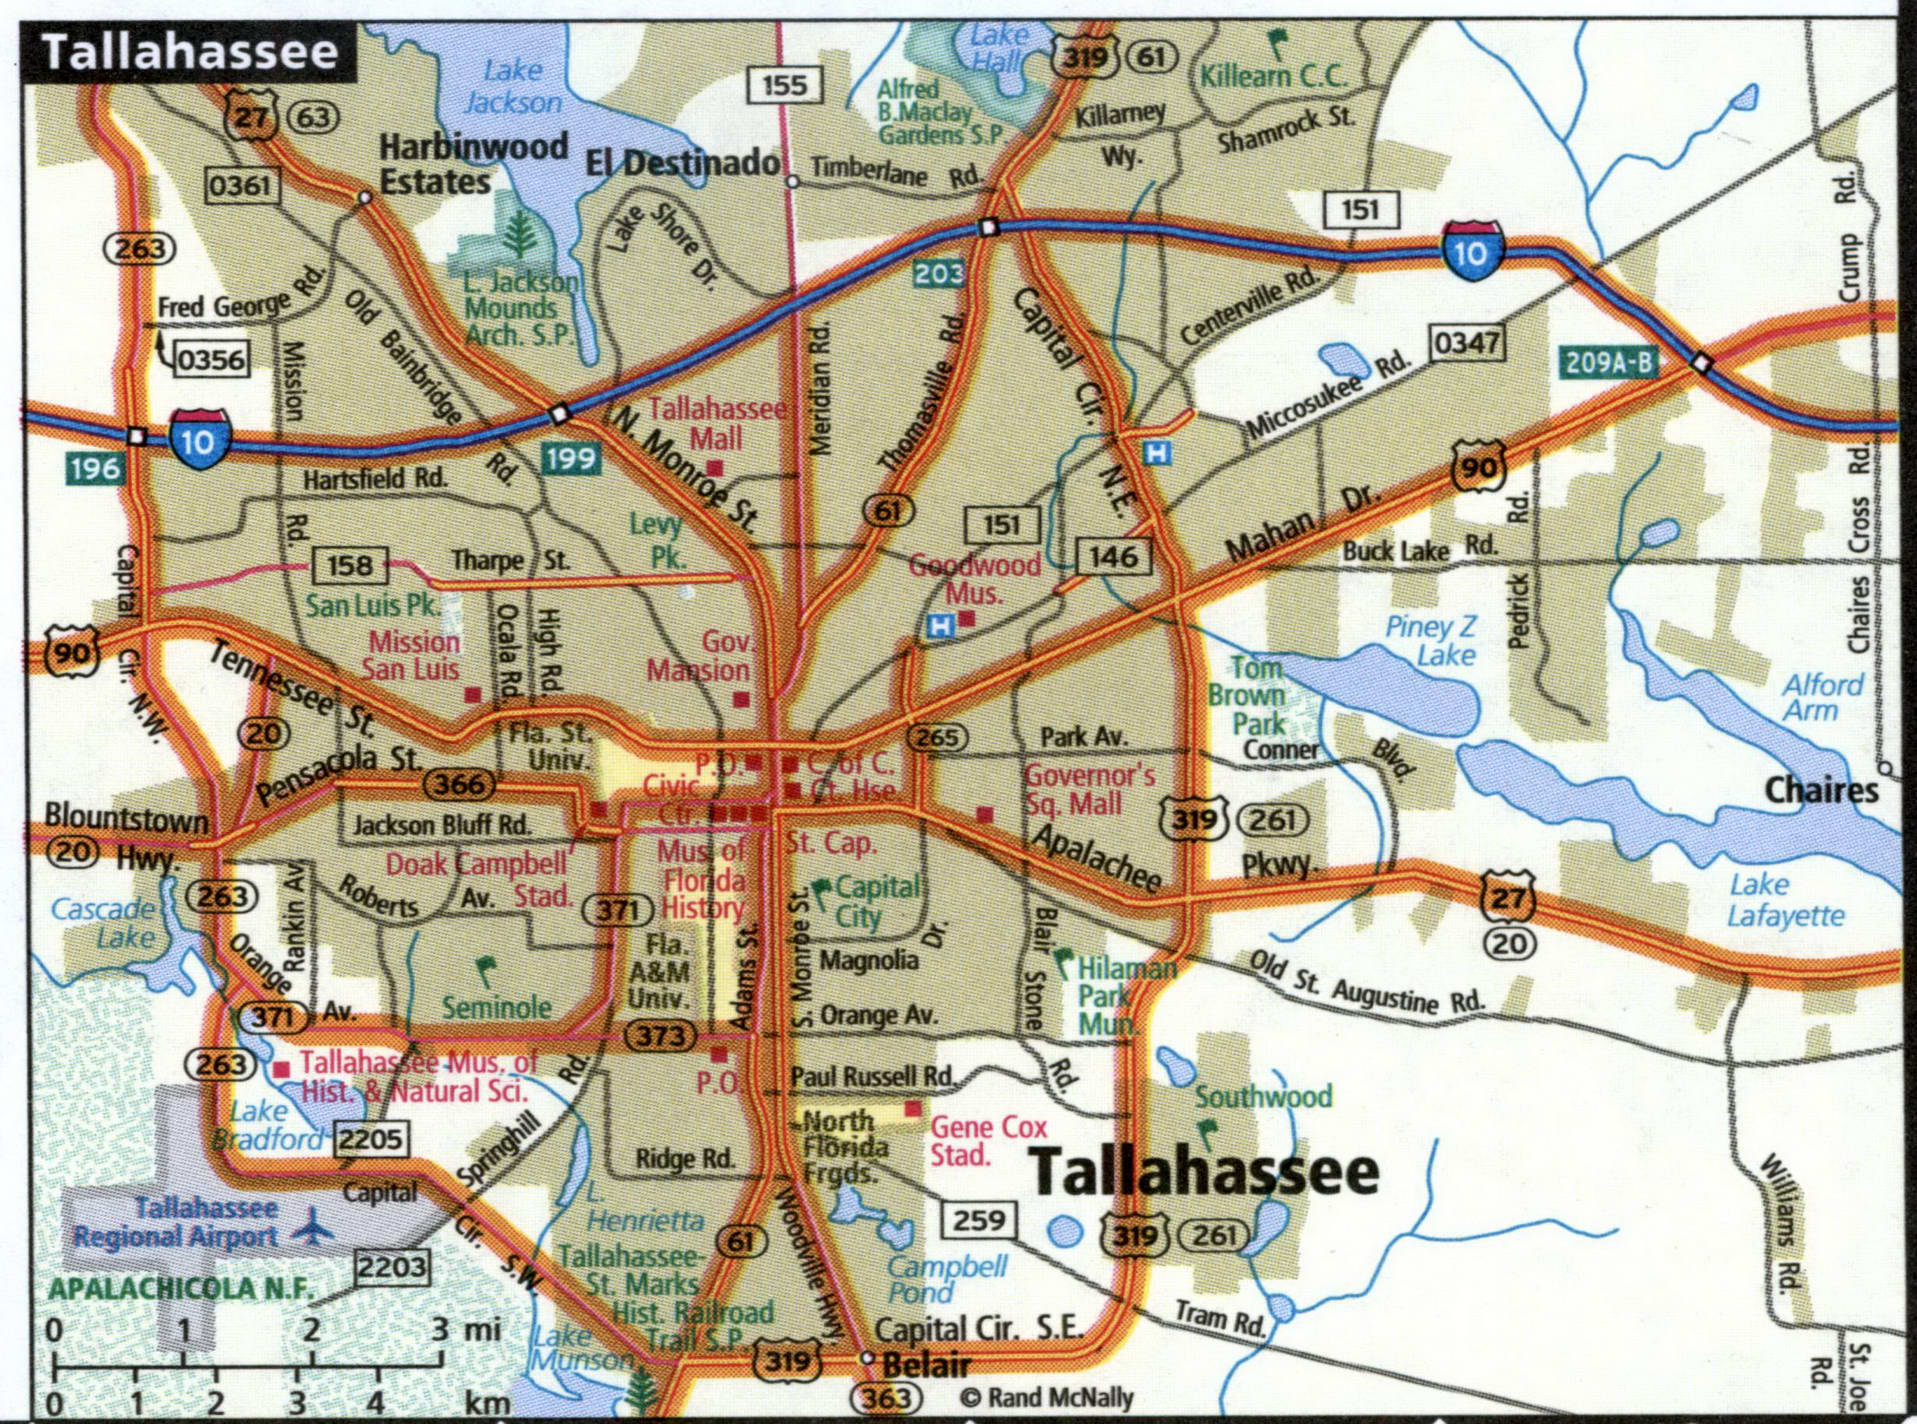 Tallahassee map for truckers